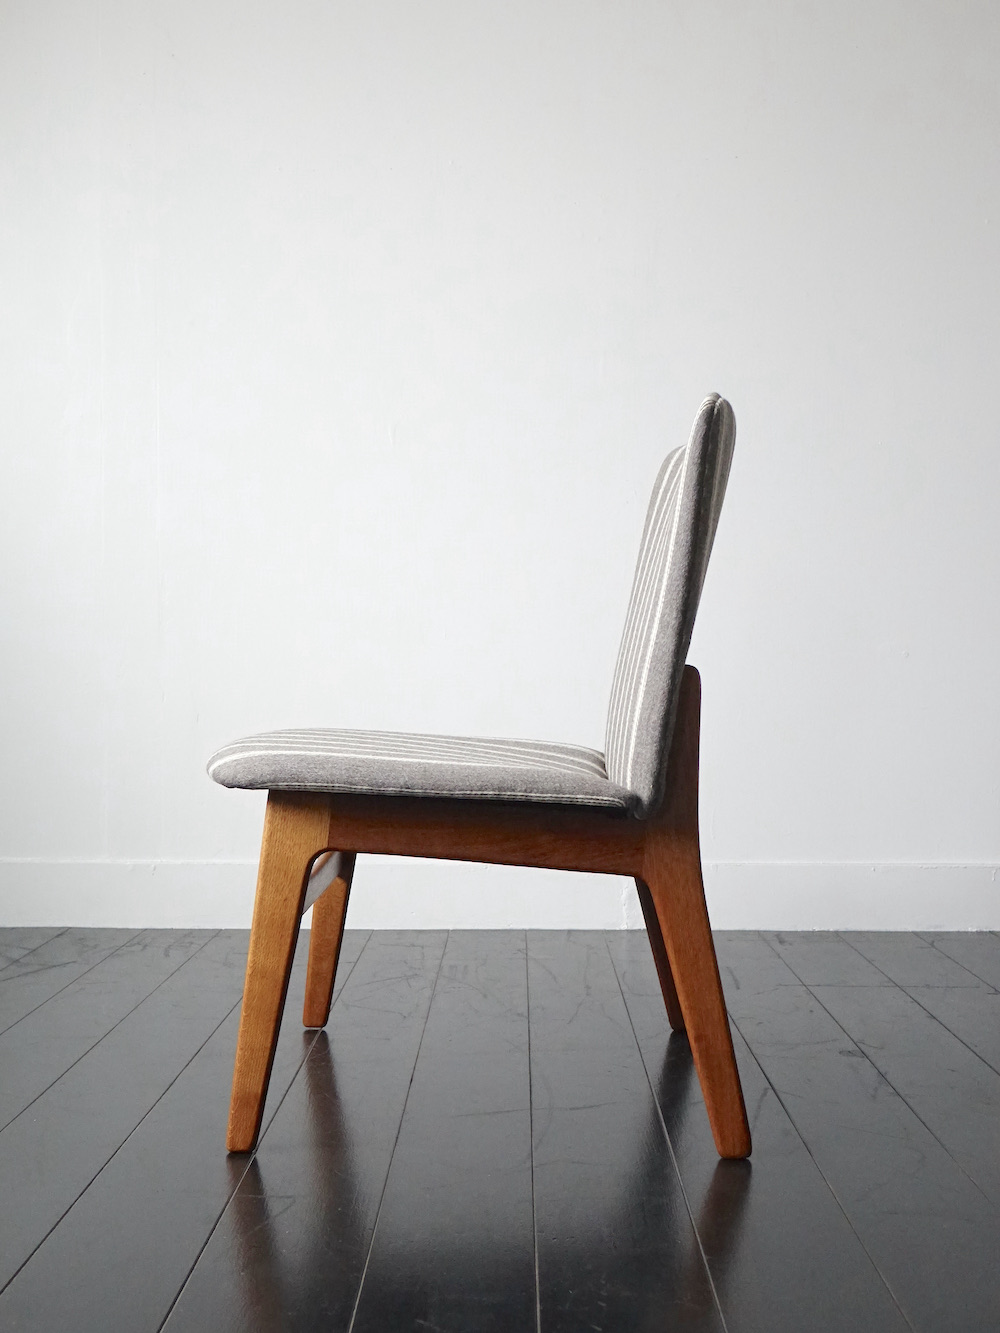 Model.230 Eazy Chair by Borge Mogensen for Fredericia